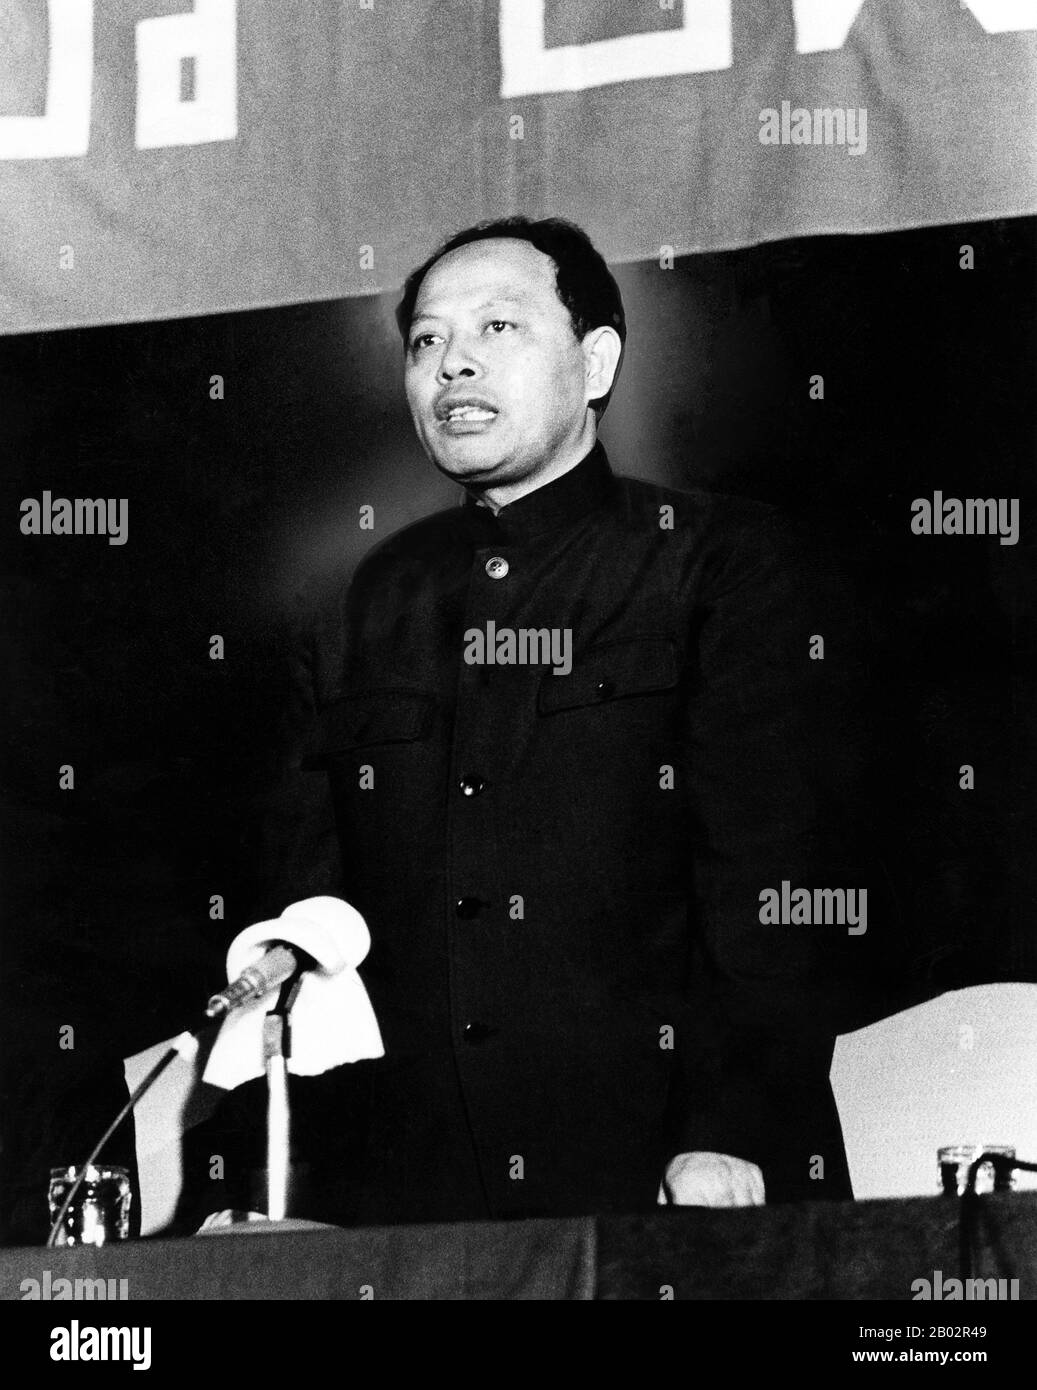 Ieng Sary, Khmer Rouge 'Brother No 3', was born Kim Trang in Tra Vinh Province, Vietnam, in 1924. He was Deputy Prime Minister and Foreign Minister of Democratic Kampuchea from 1975 to 1979 and held several senior positions in the Khmer Rouge until his defection in 1996.   He was married to Ieng Thirith, former Khmer Rouge Social Affairs Minister. Ieng Sary died in detention while on trial for genocide, 14 March, 2013, aged 87 years. Stock Photo